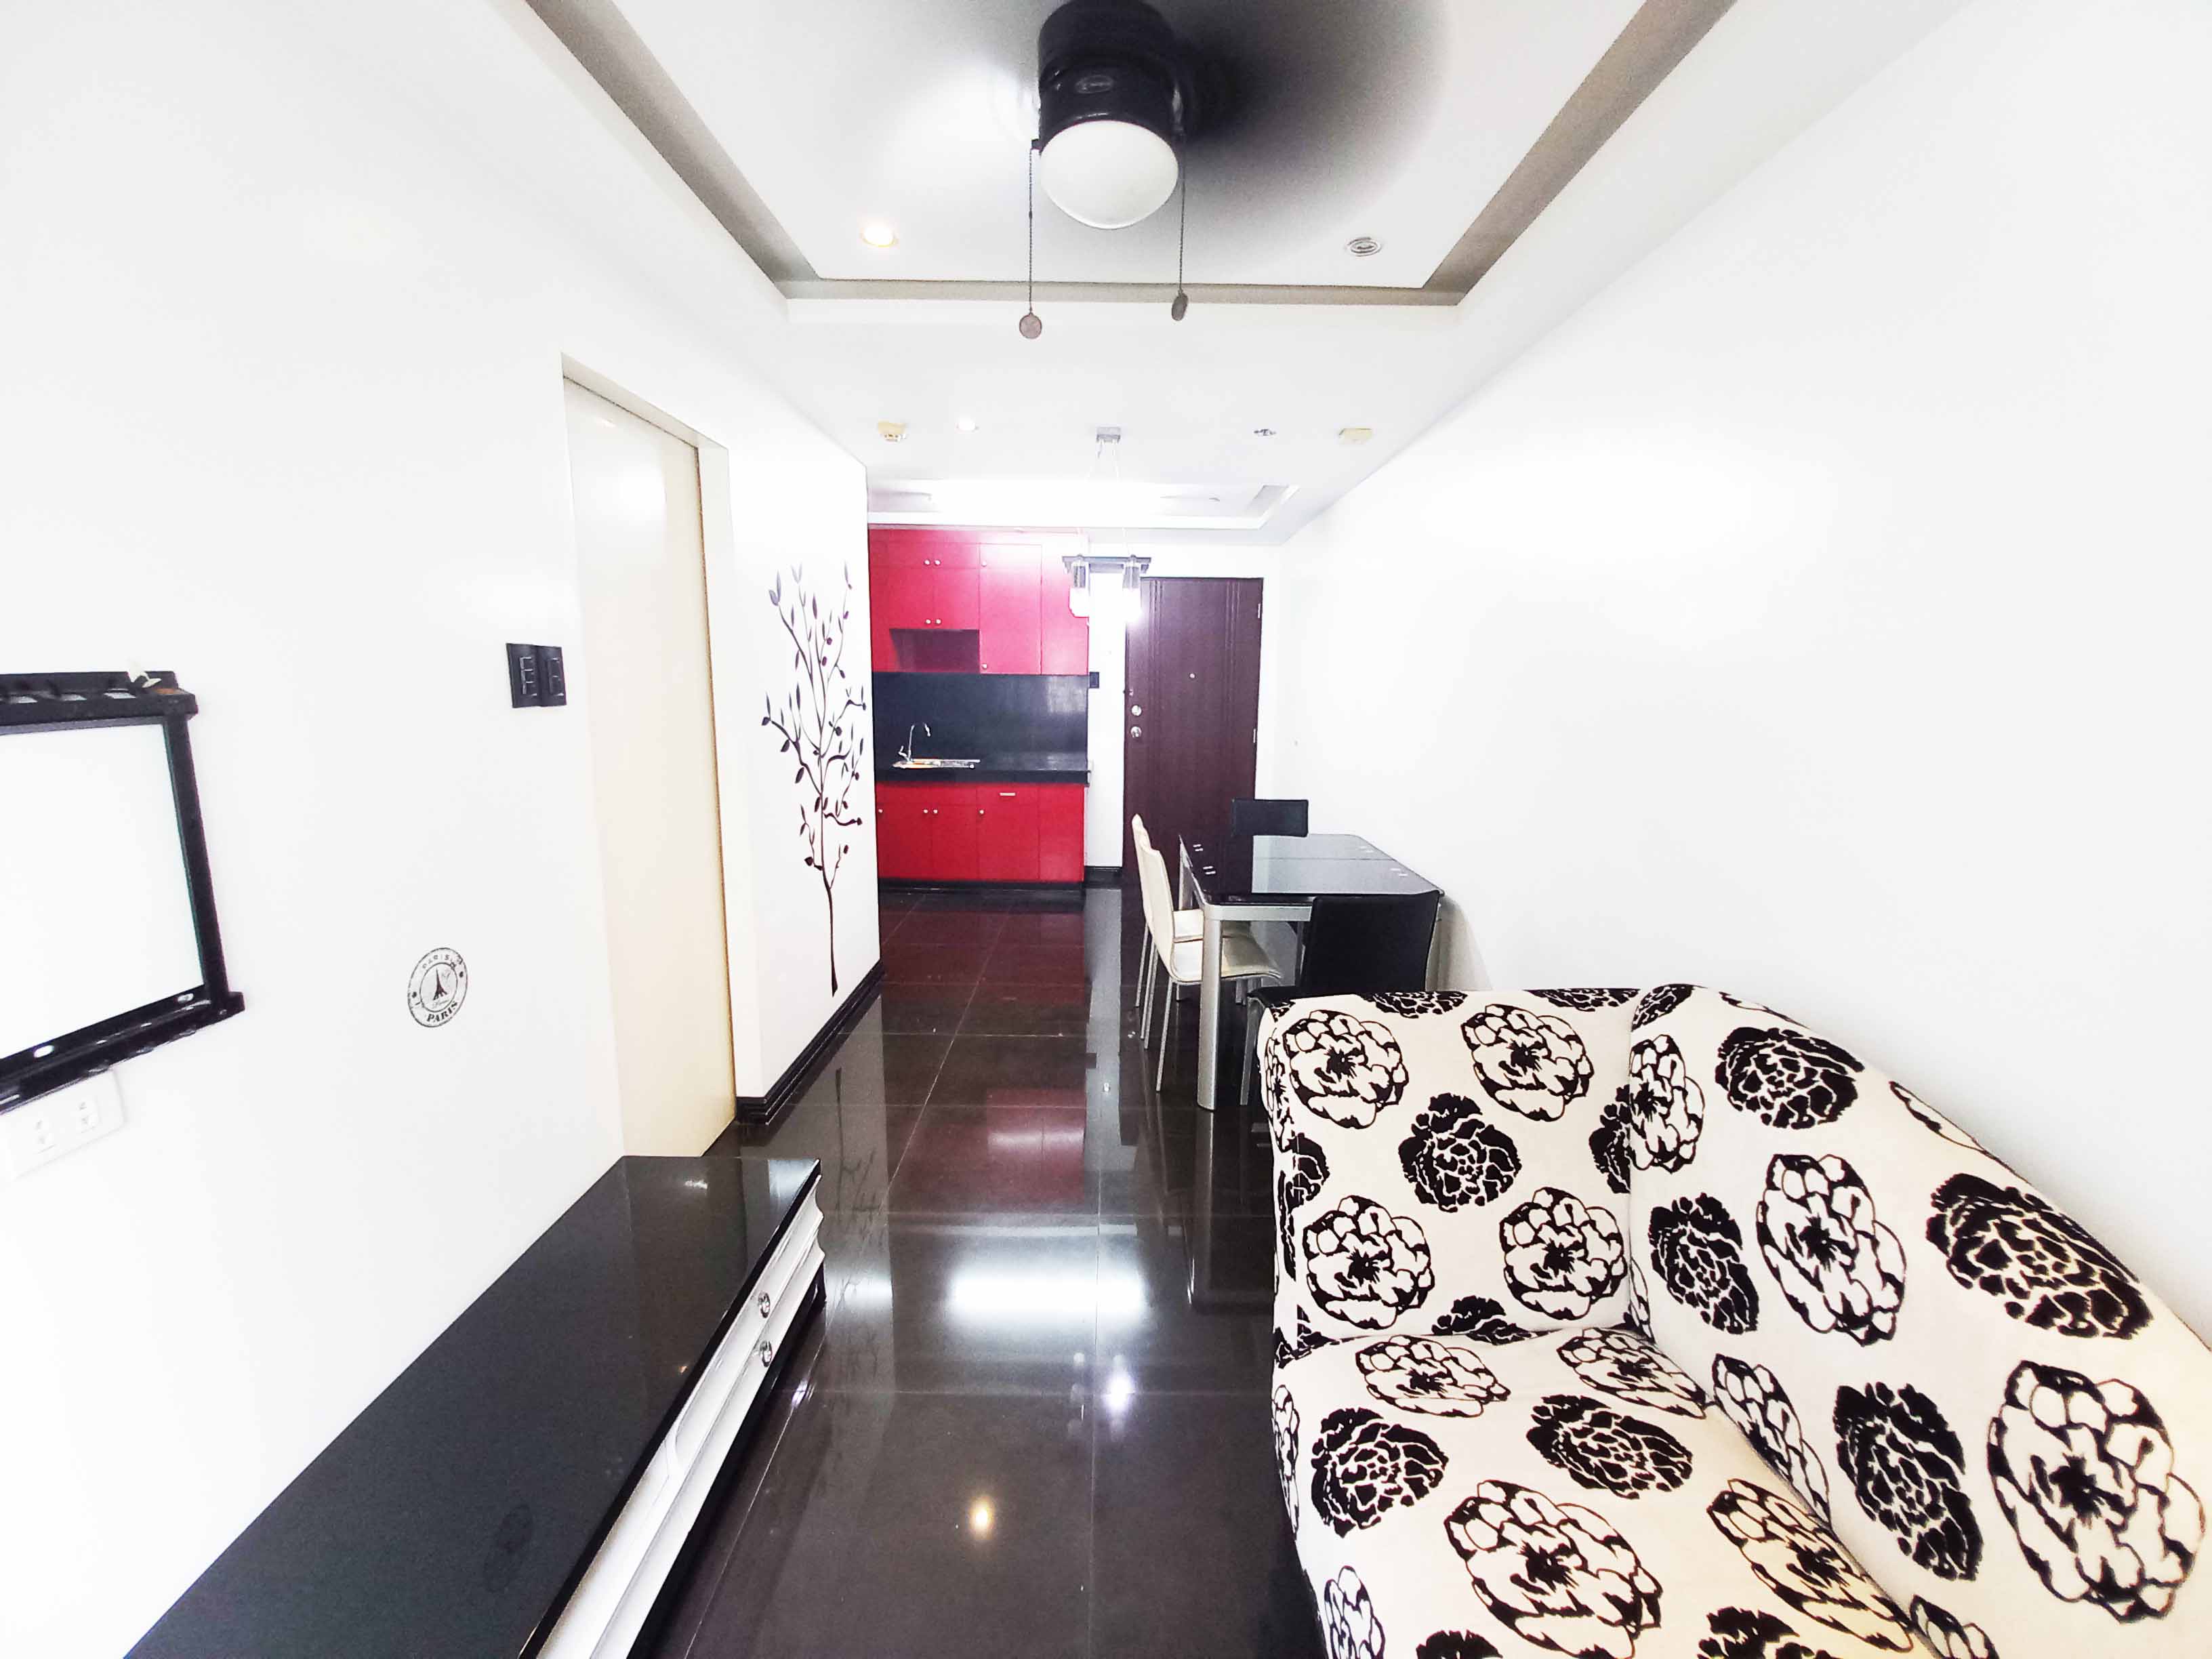 1 BEDROOM FOR RENT IN QC- NEAR UP DILIMAN, ATENEO, AND MIRIAM